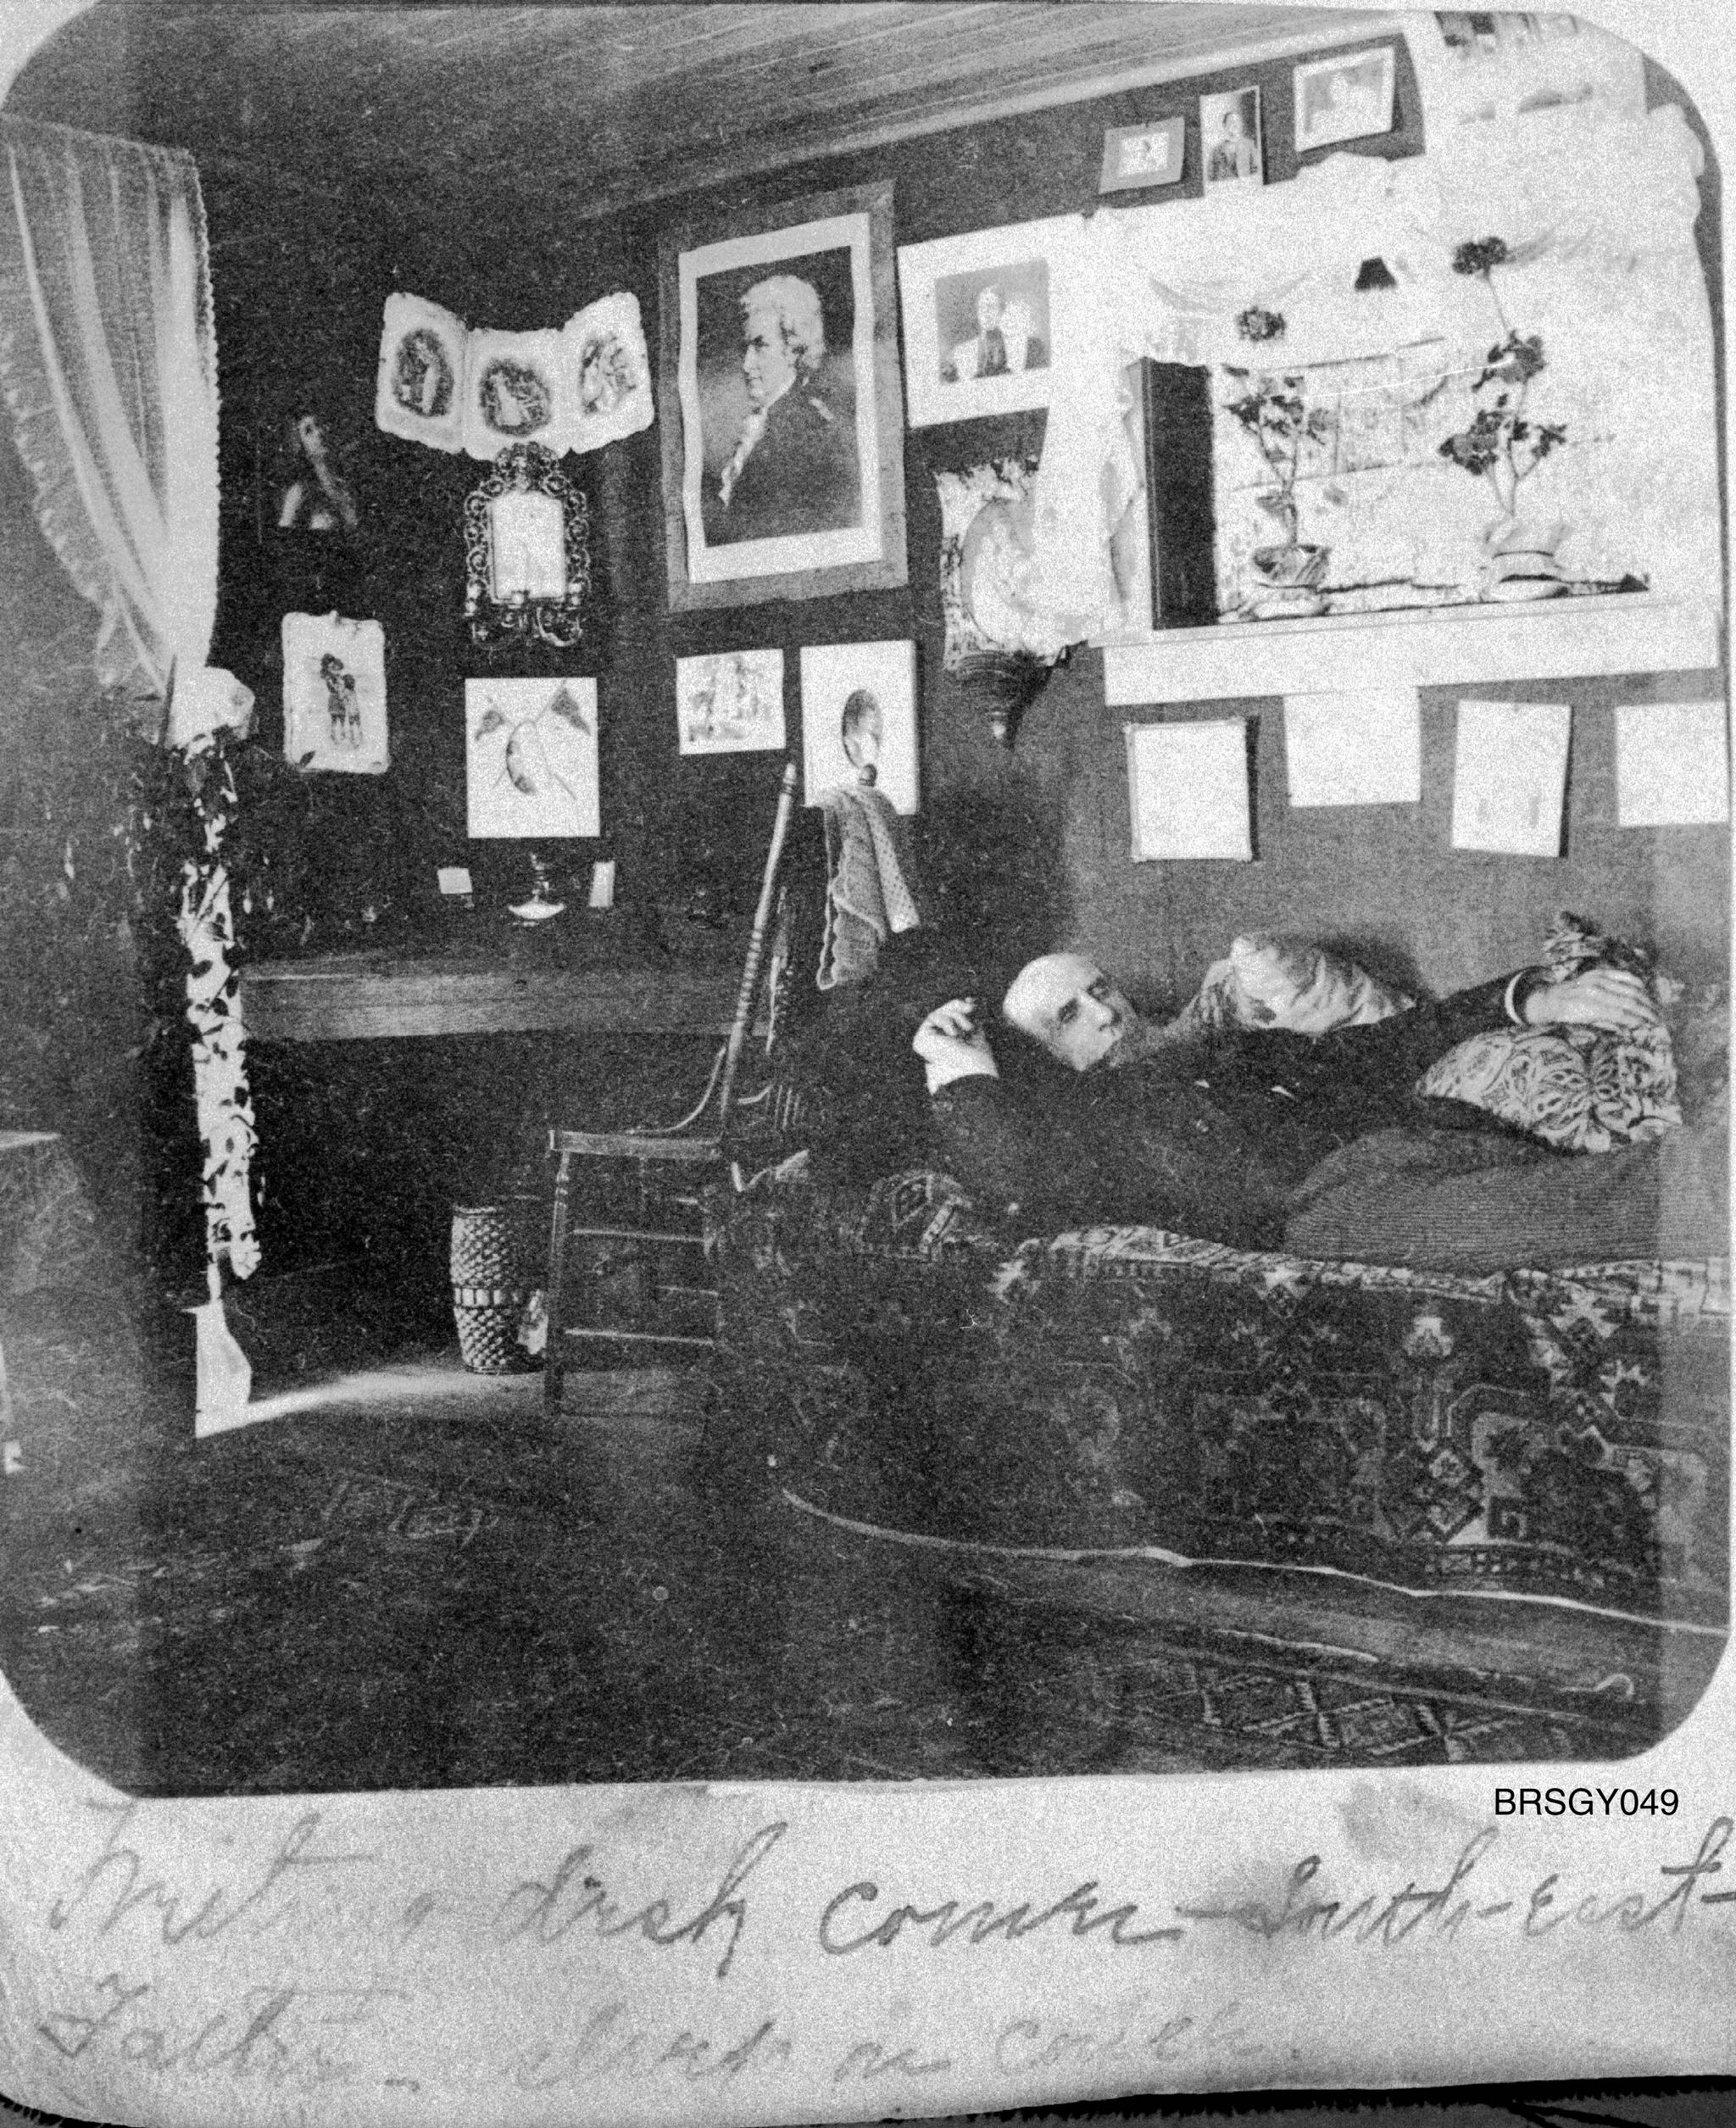 “Writing desk corner – south-east / Father asleep on couch” circa 1898-1900. This room was probably on the second floor of the two-story Brackett’s Trading Post, otherwise known as the “Mansion House,” located on the northwest corner of 3rd Avenue and Main Street in Skagway. (Courtesy Photo | National Park Service, Klondike Gold Rush National Historical Park, Brackett Family Collection, BRSGY049, KLGO BI-45-5246)